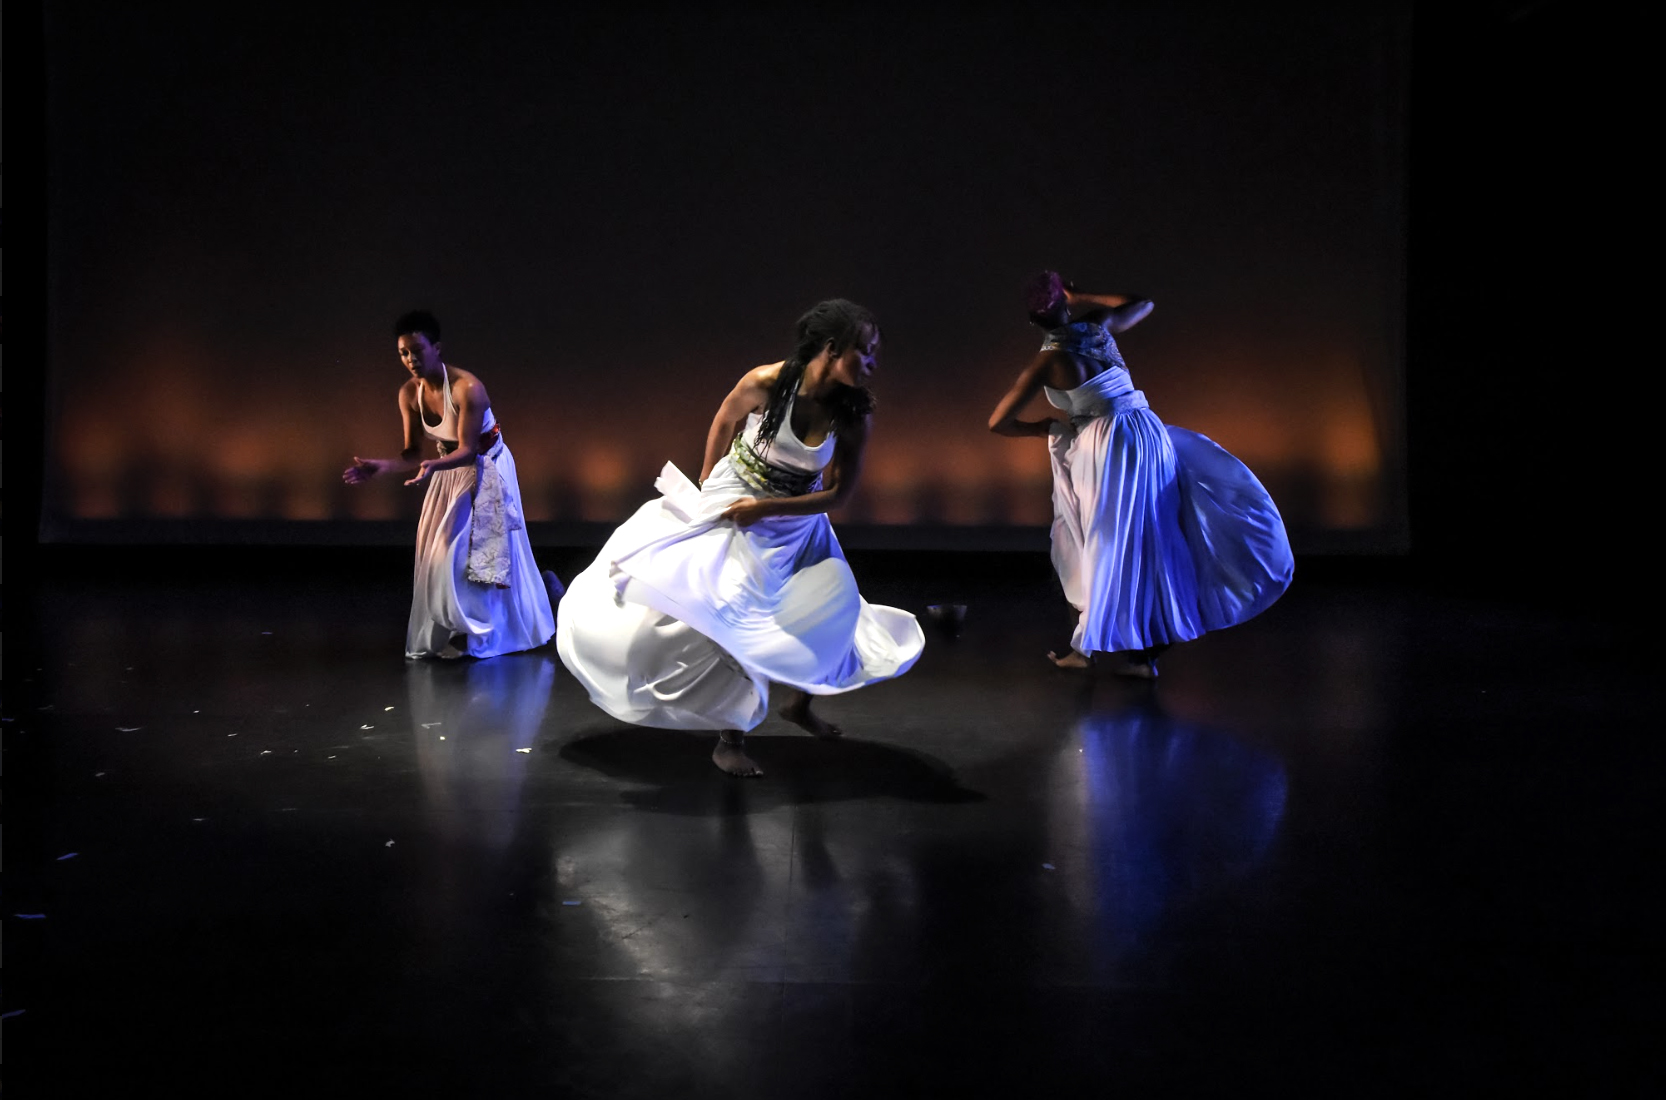 Moving Spirits performing at the Ohio Dance Festival (photograph by Jess Cavender)